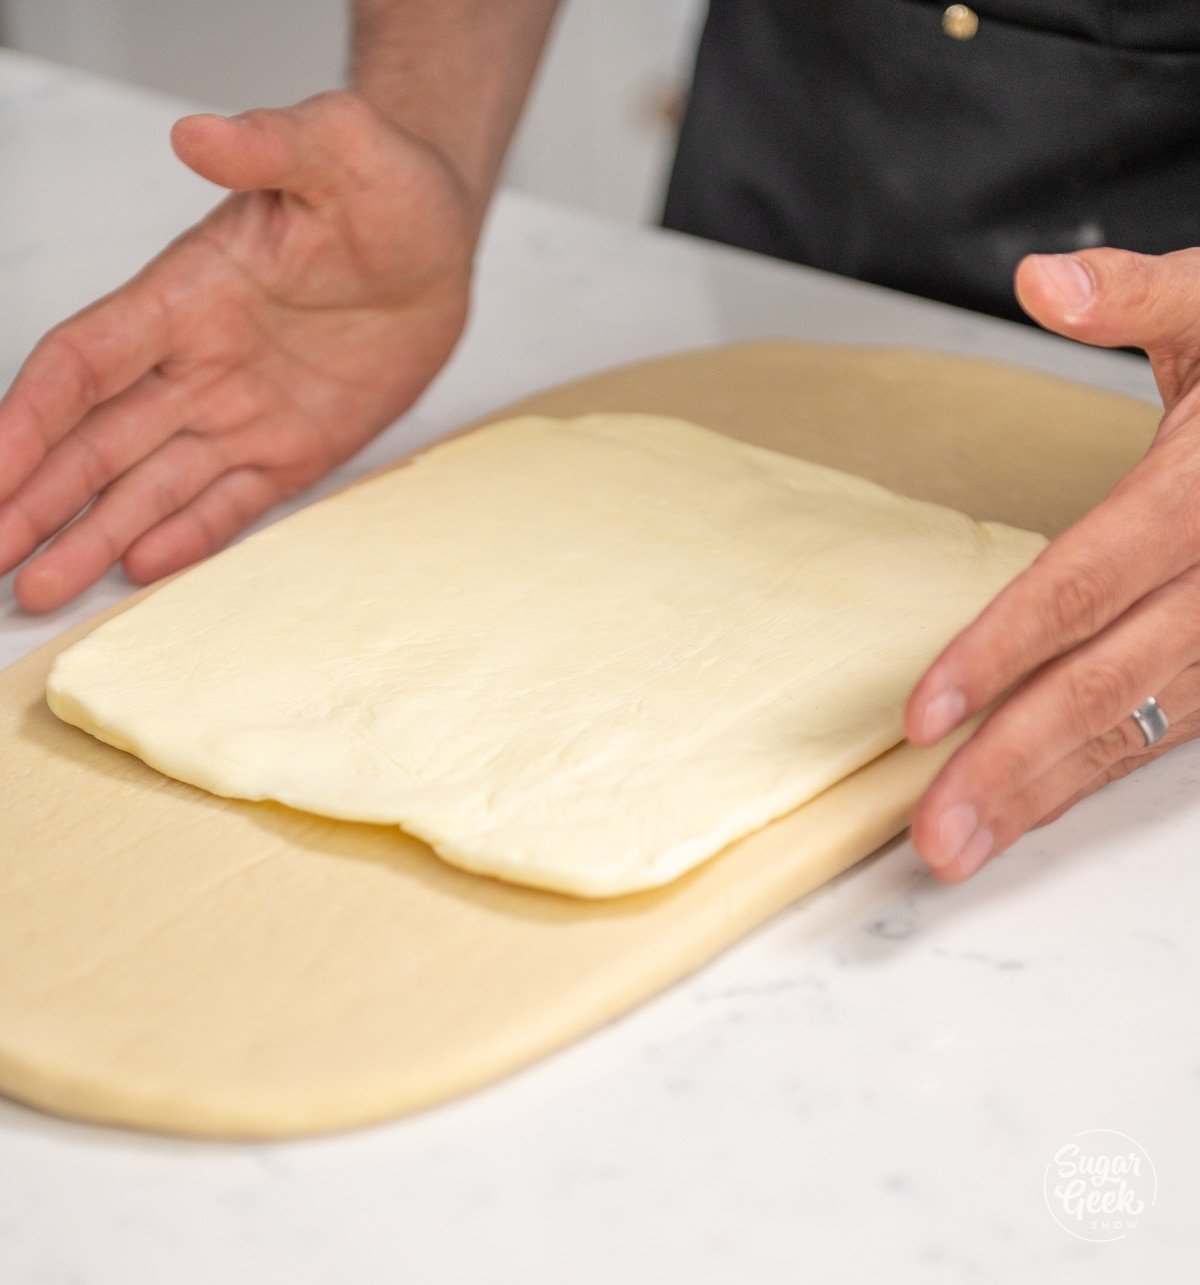 hands placing a butter block on top of croissant dough